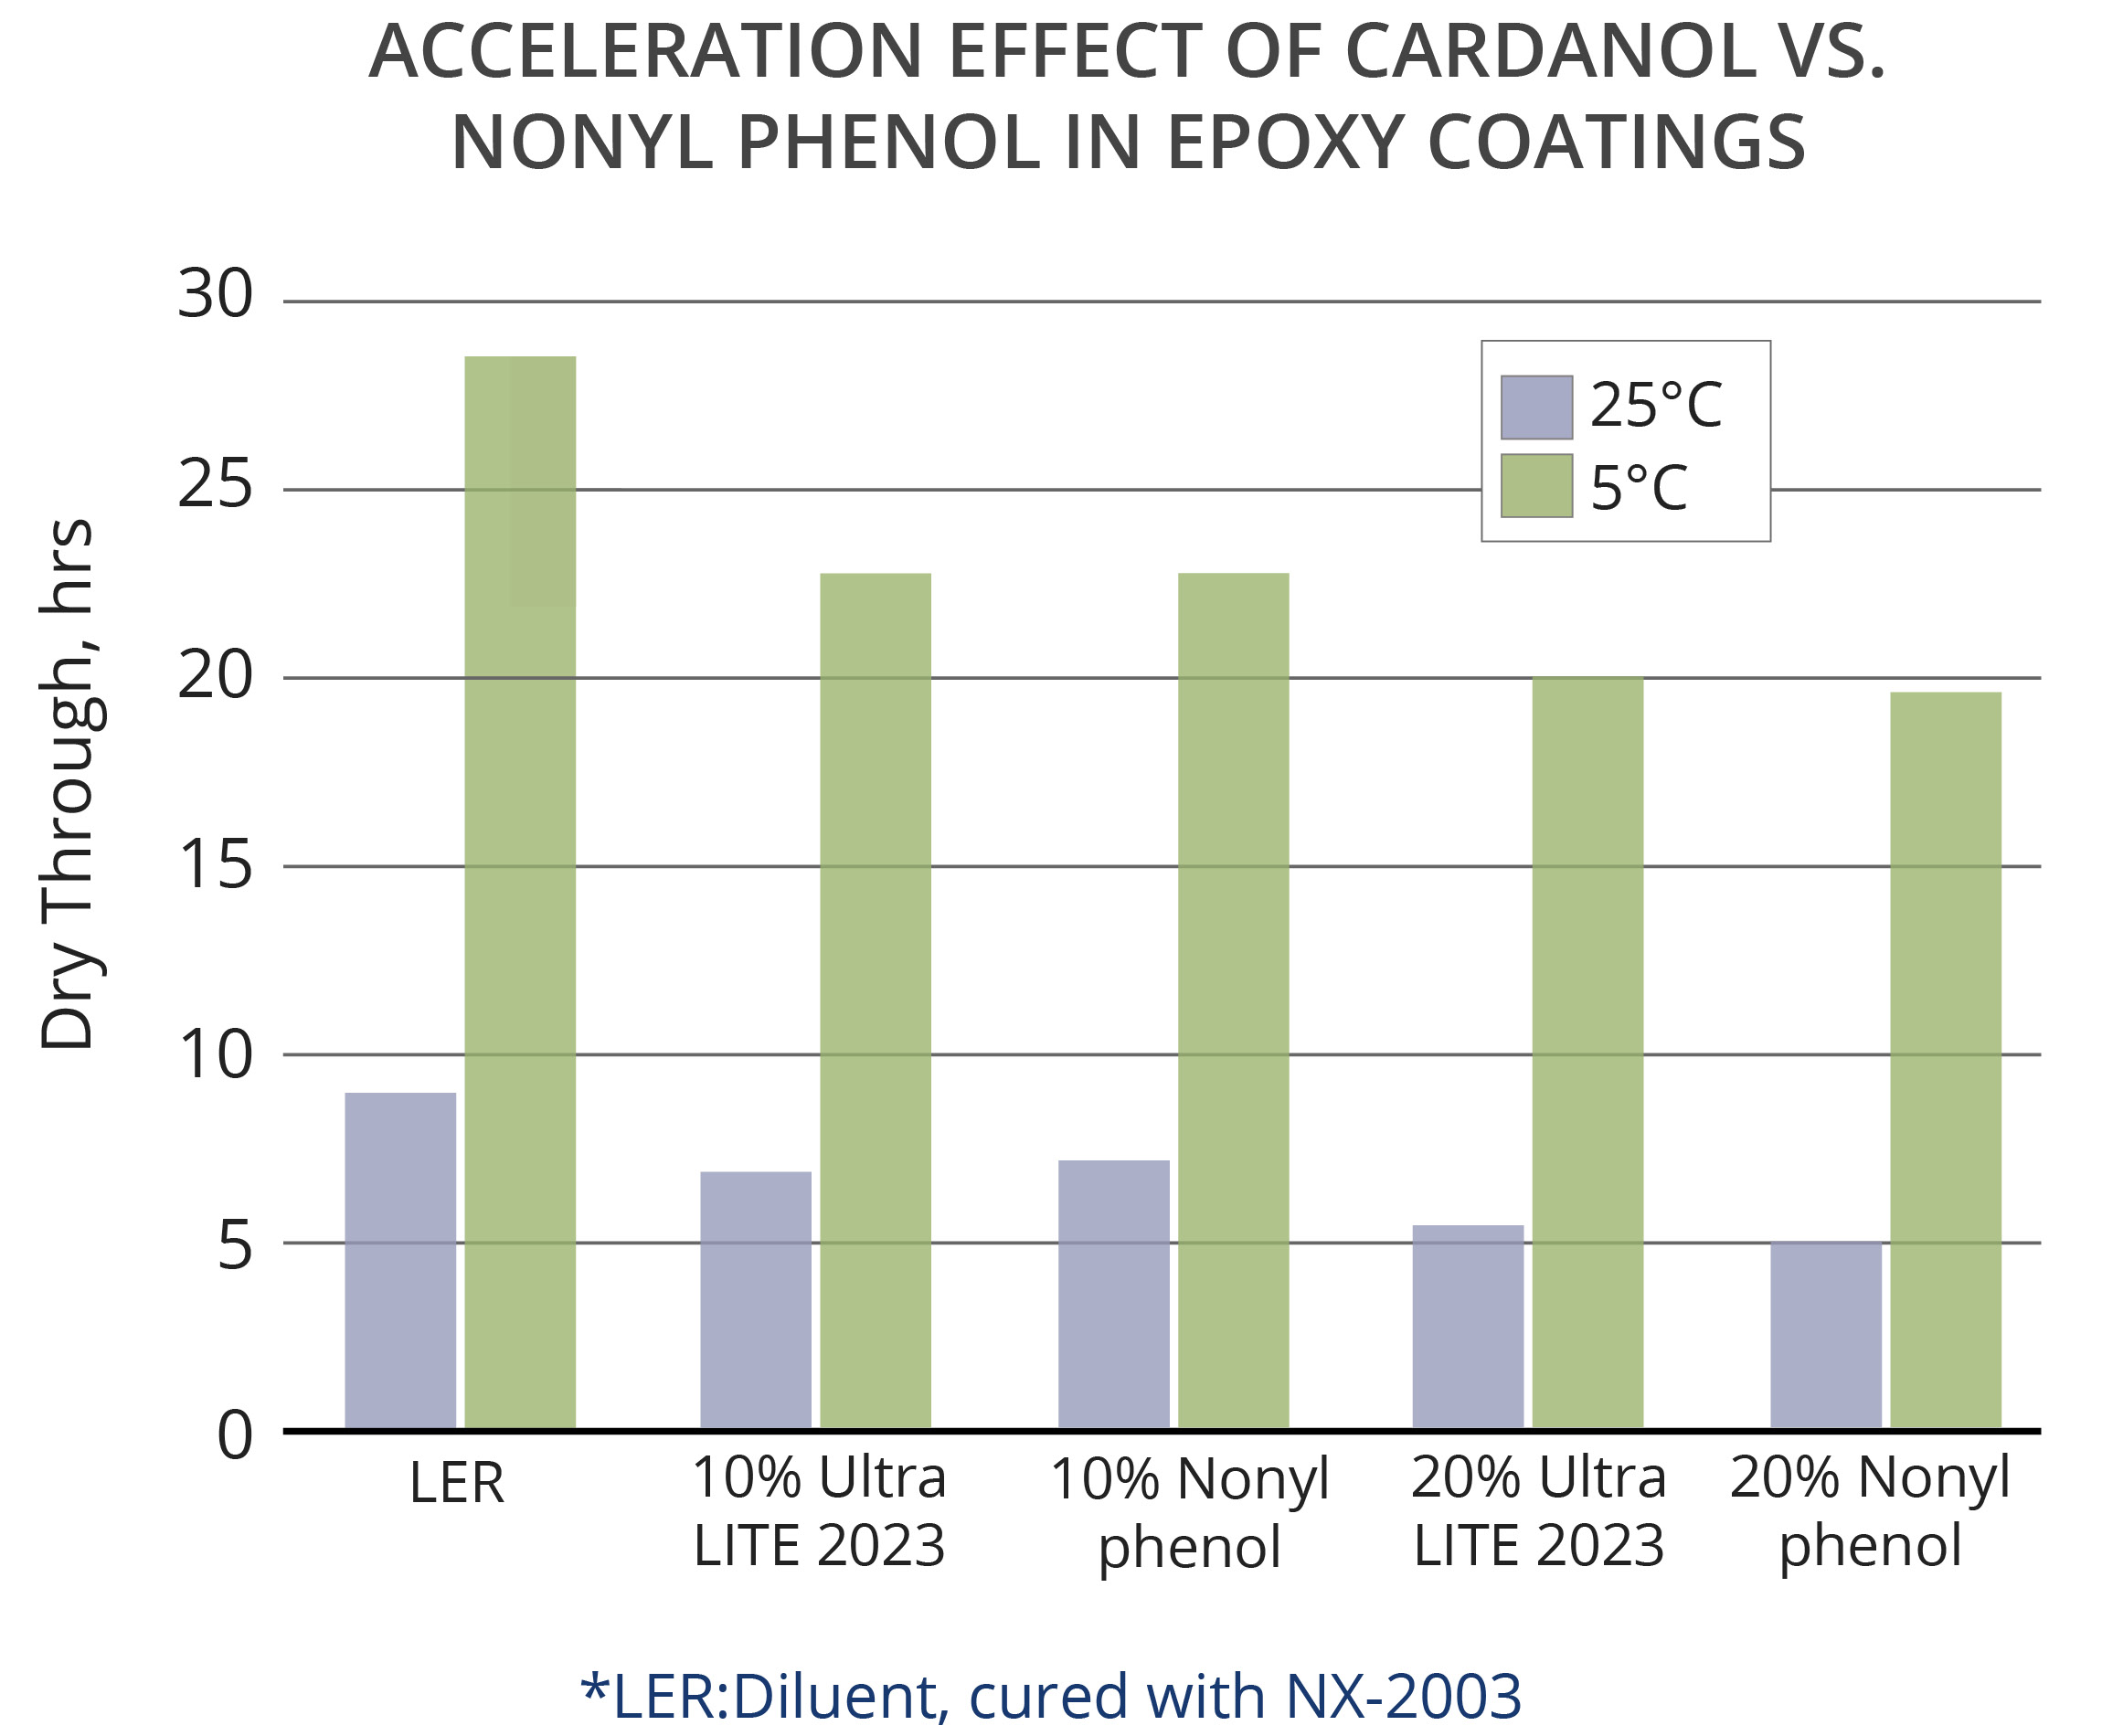 cardanol is an accelerator for epoxy amine reactions, similar to nonyl phenol